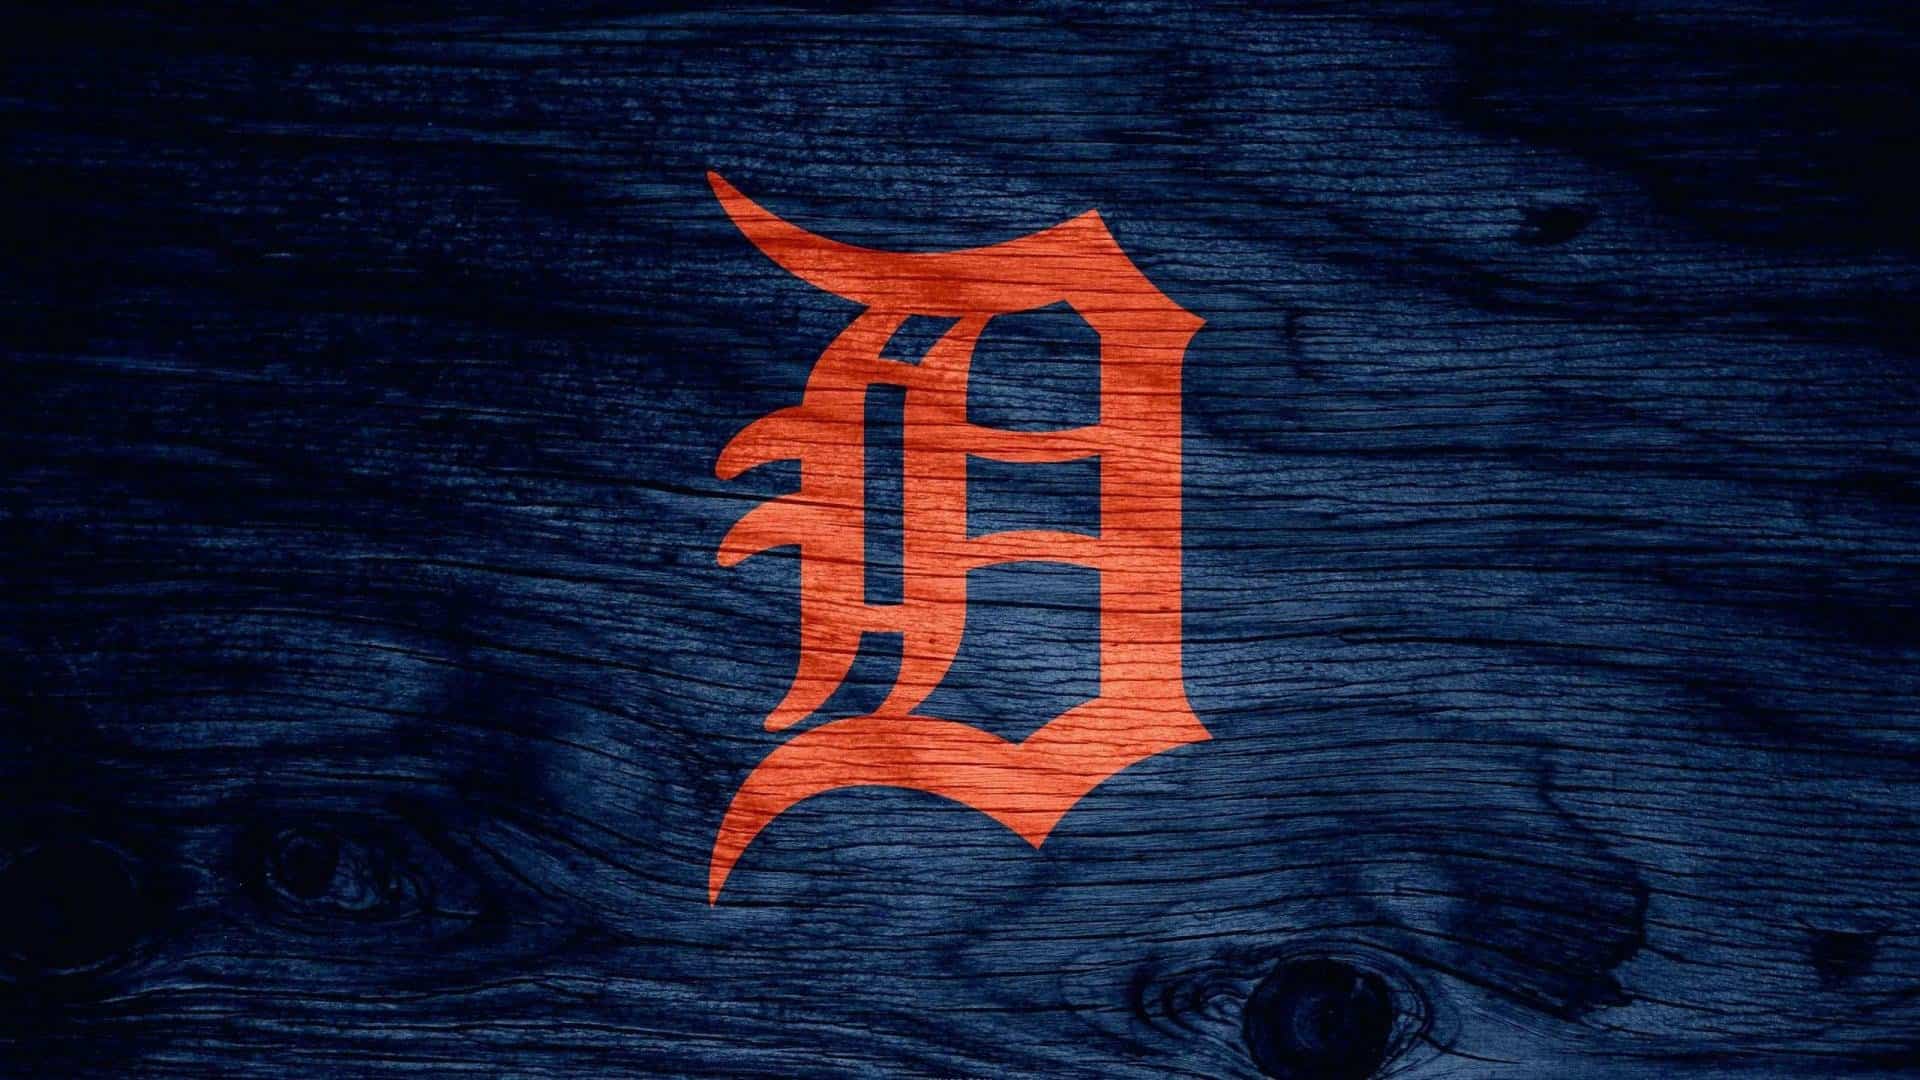 Detroit Tigers Trevor Rosenthal Zach McKinstry Spencer Turnbull Riley Greene Reese Olson Joey Wentz Reese Olson Nick Solak Spencer Turnbull Scott Harris Colt Keith Franklin Perez 2023 MLB Draft Wyatt Langford Kevin McGonigle Mike Ivie Zach Logue Detroit Tigers acquire Bennett Sousa Armed Robbers Invade Detroit Tigers Academy